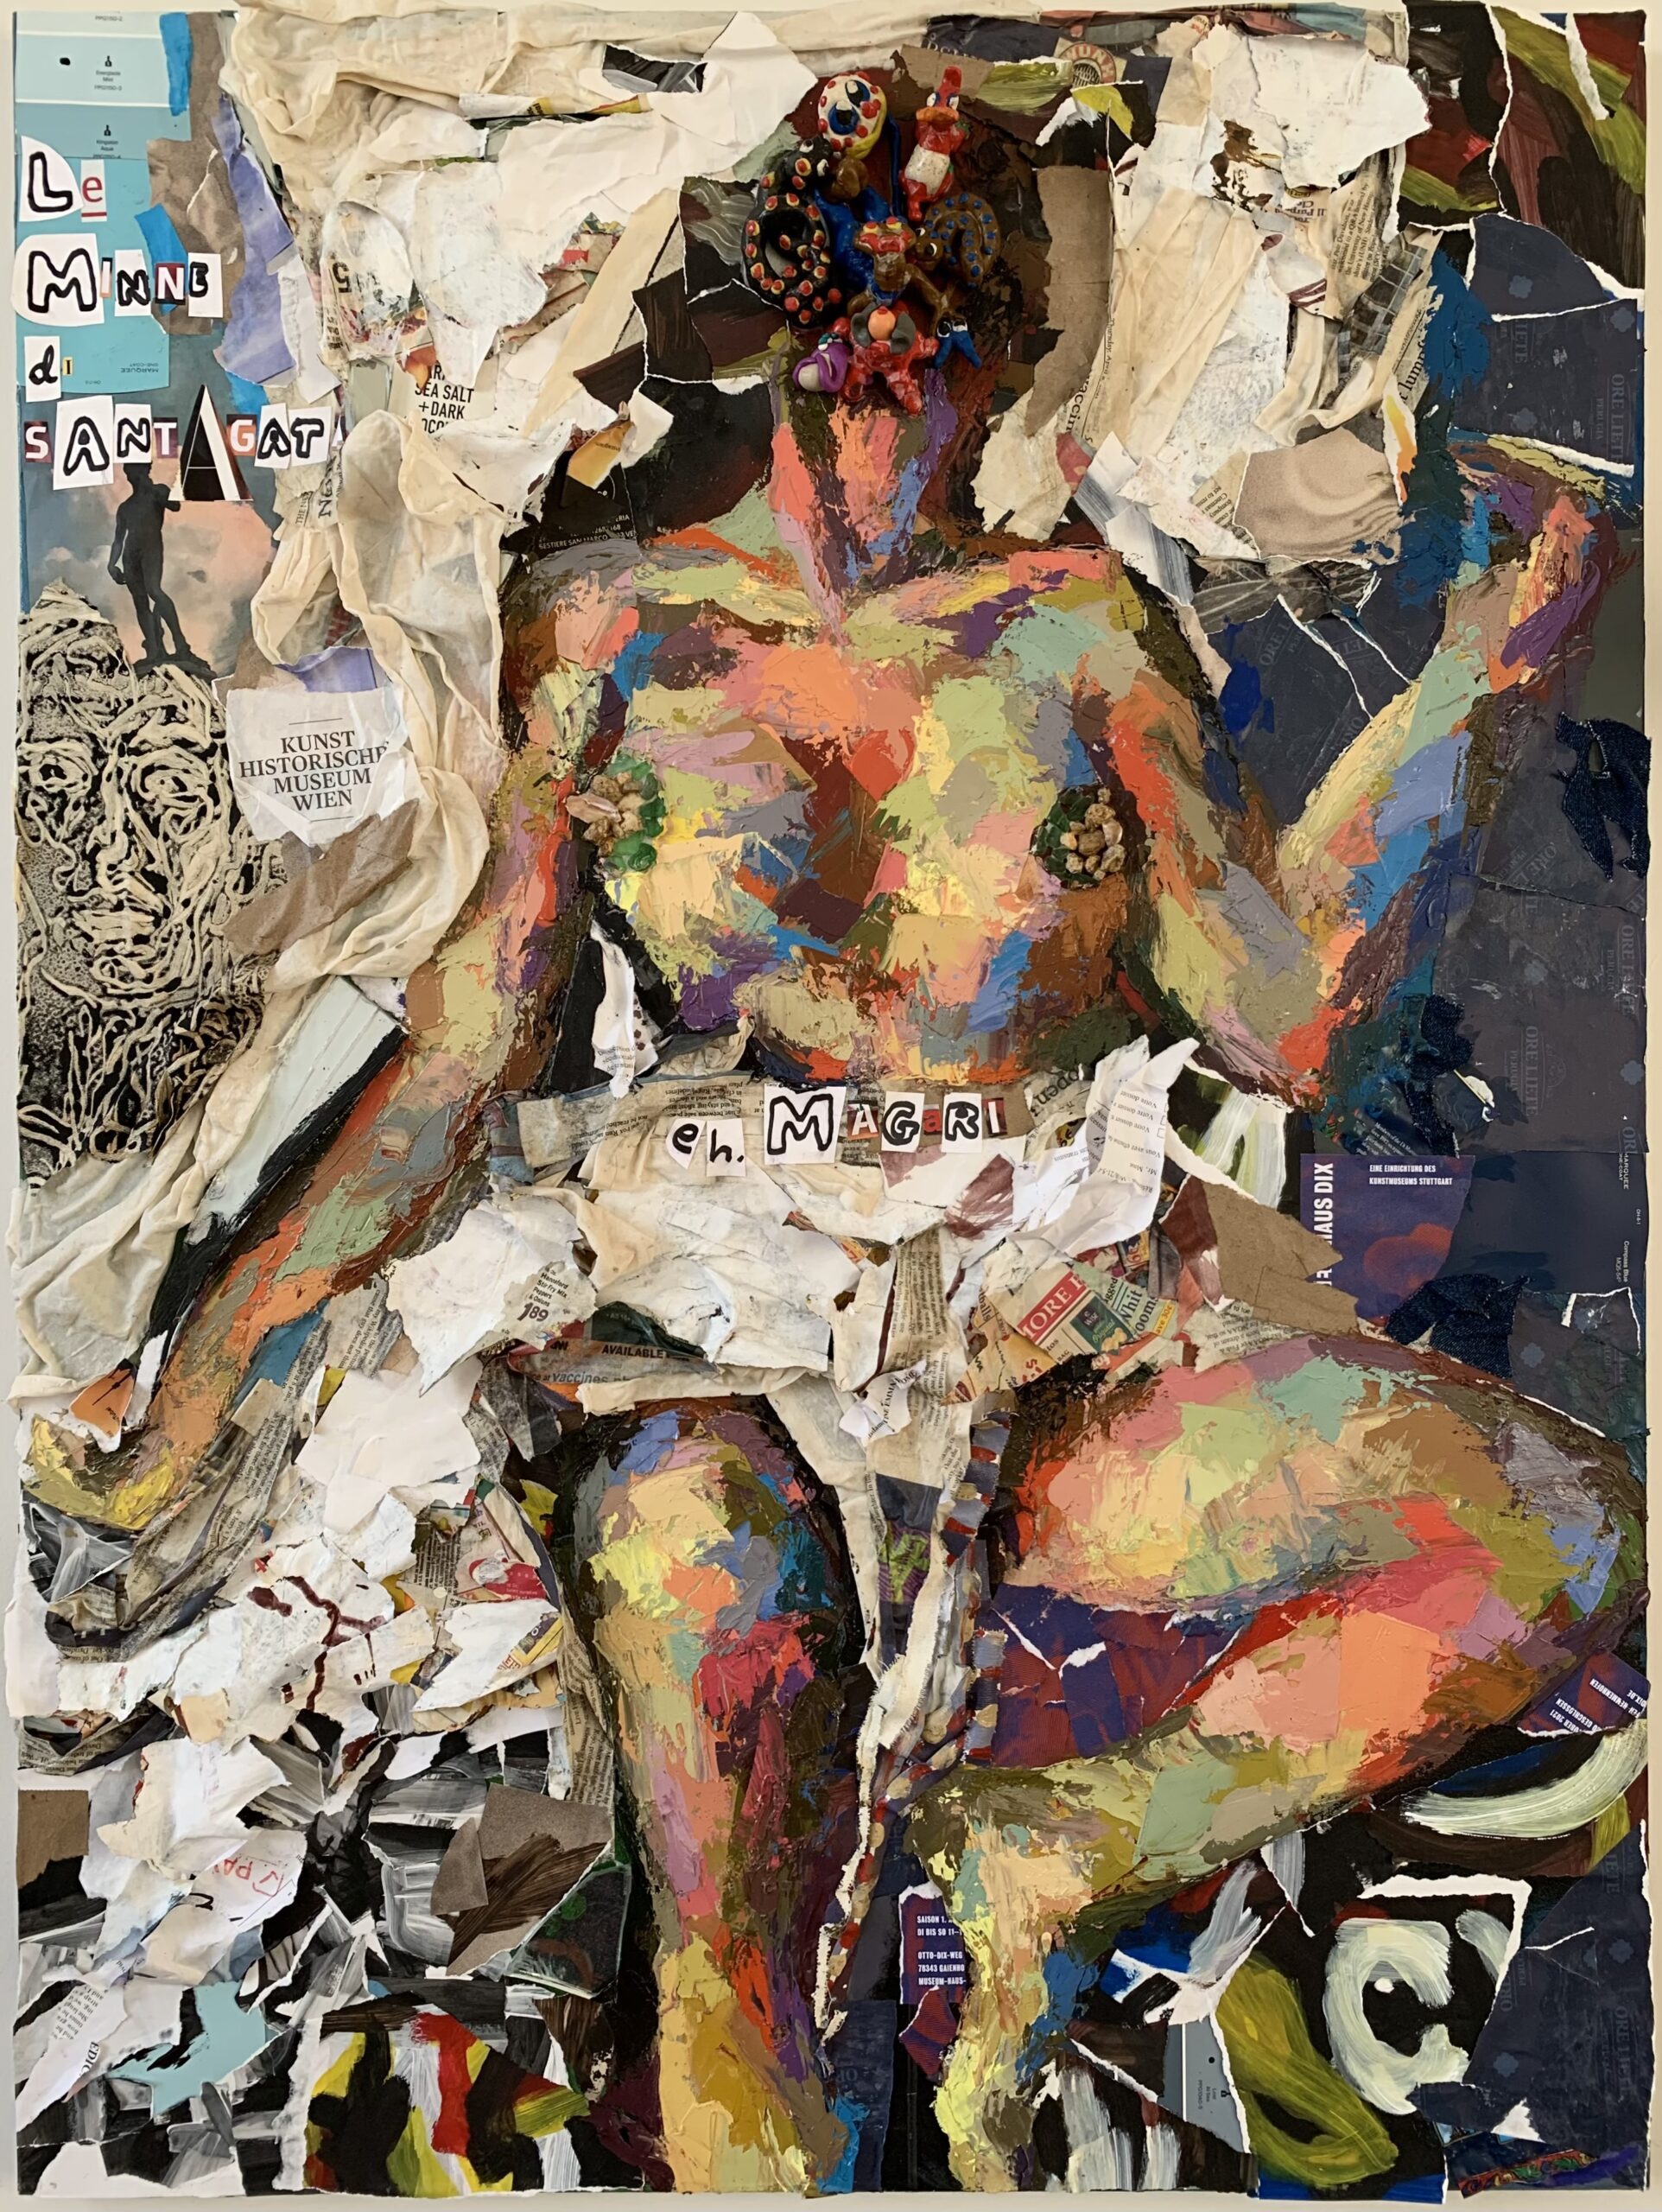 Mixed media painting of a woman laying half naked on a surface